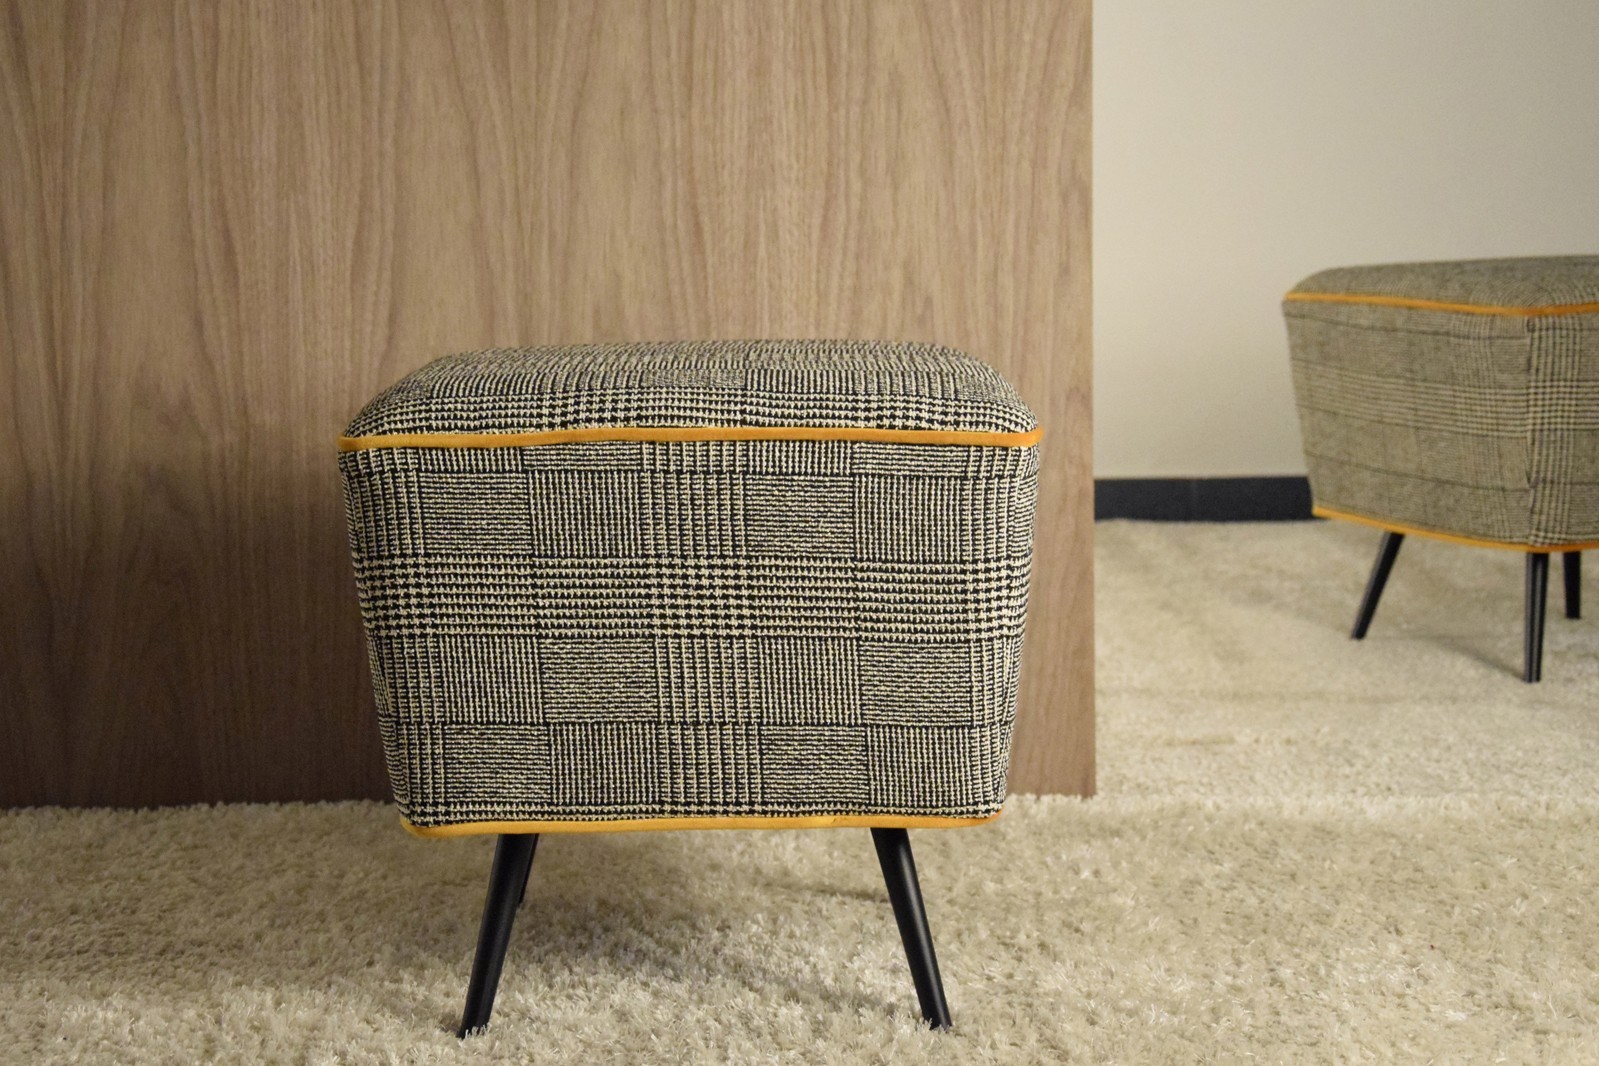 SQUARE STOOL.PRICE OF WALES UPHOLSTERY